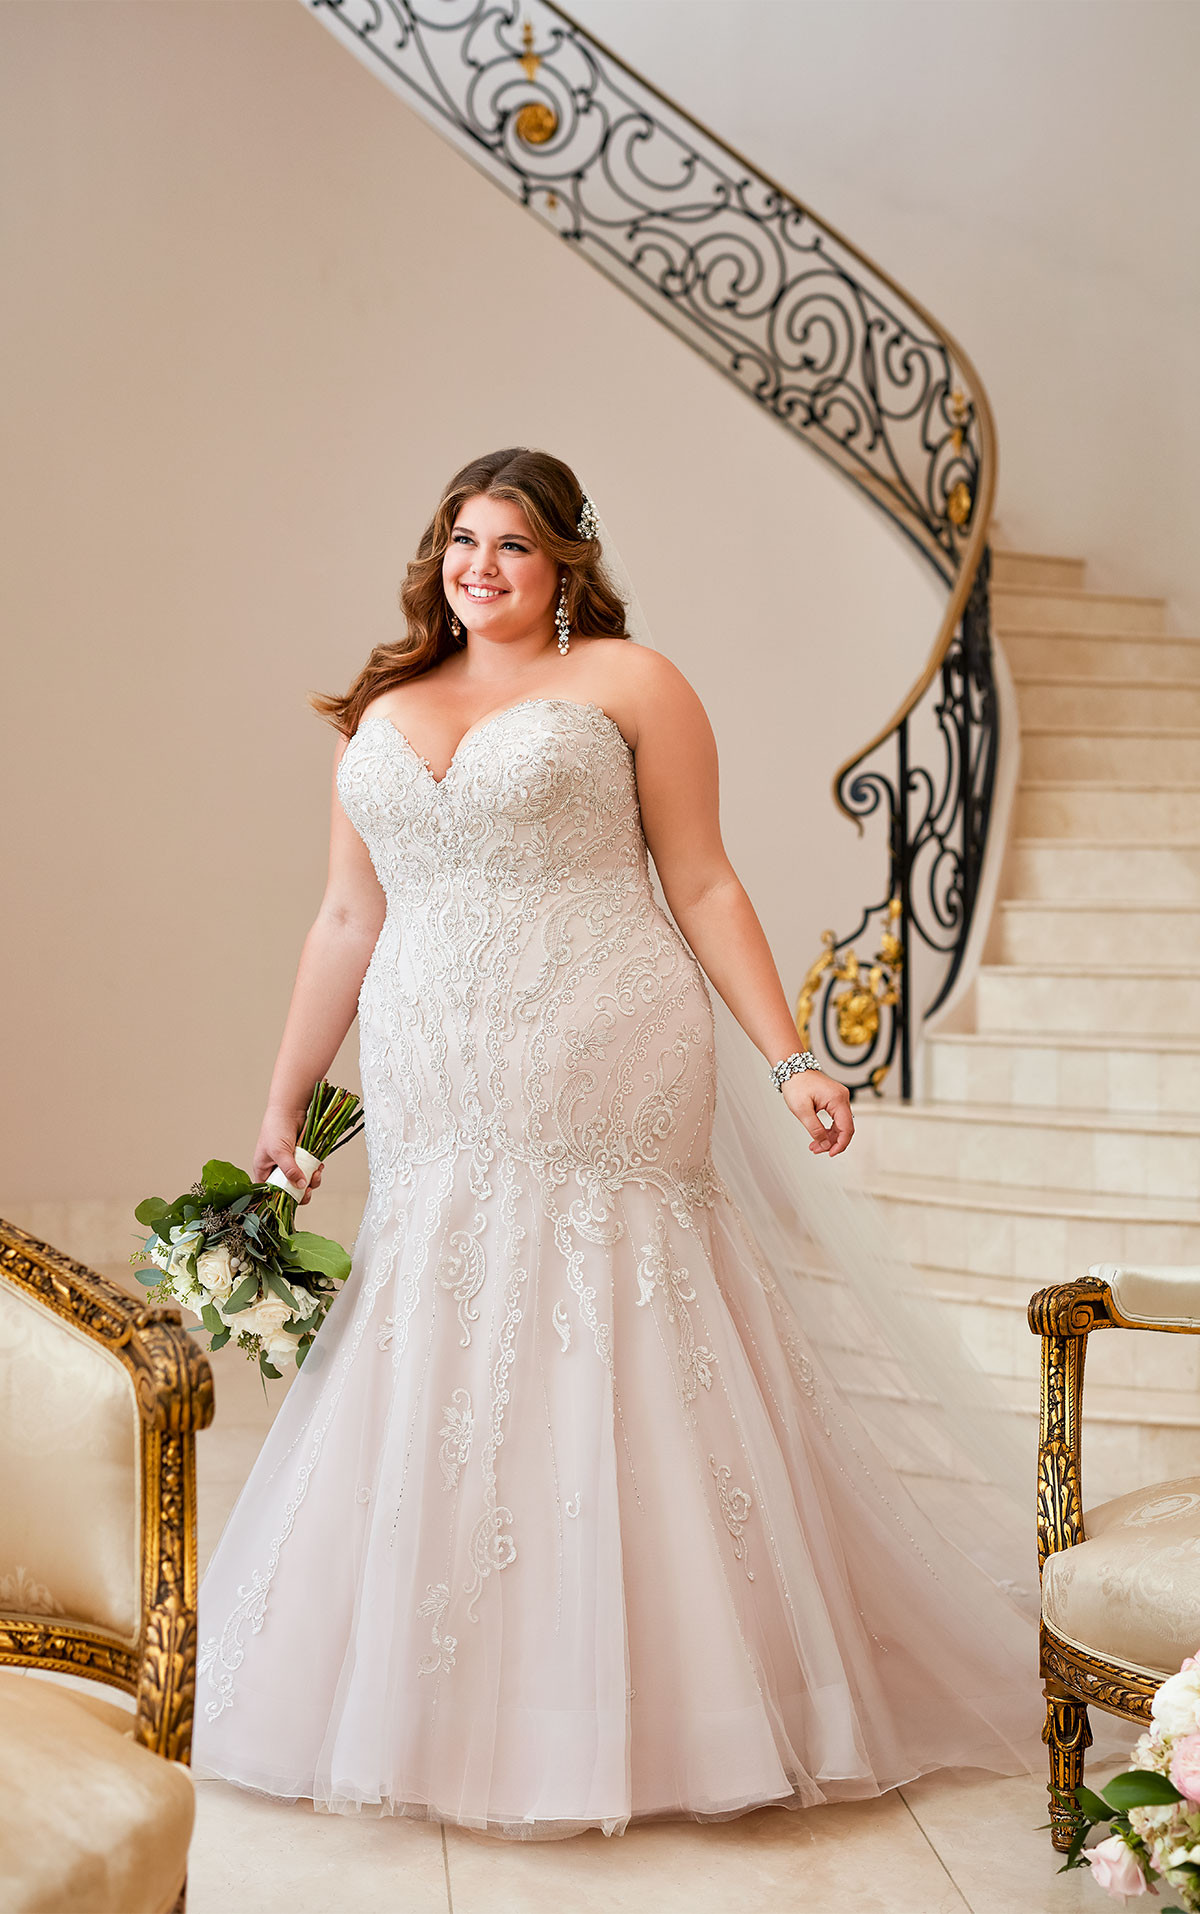 Plus Wedding Gowns
 Plus Size Wedding Dress with Glamorous Lace